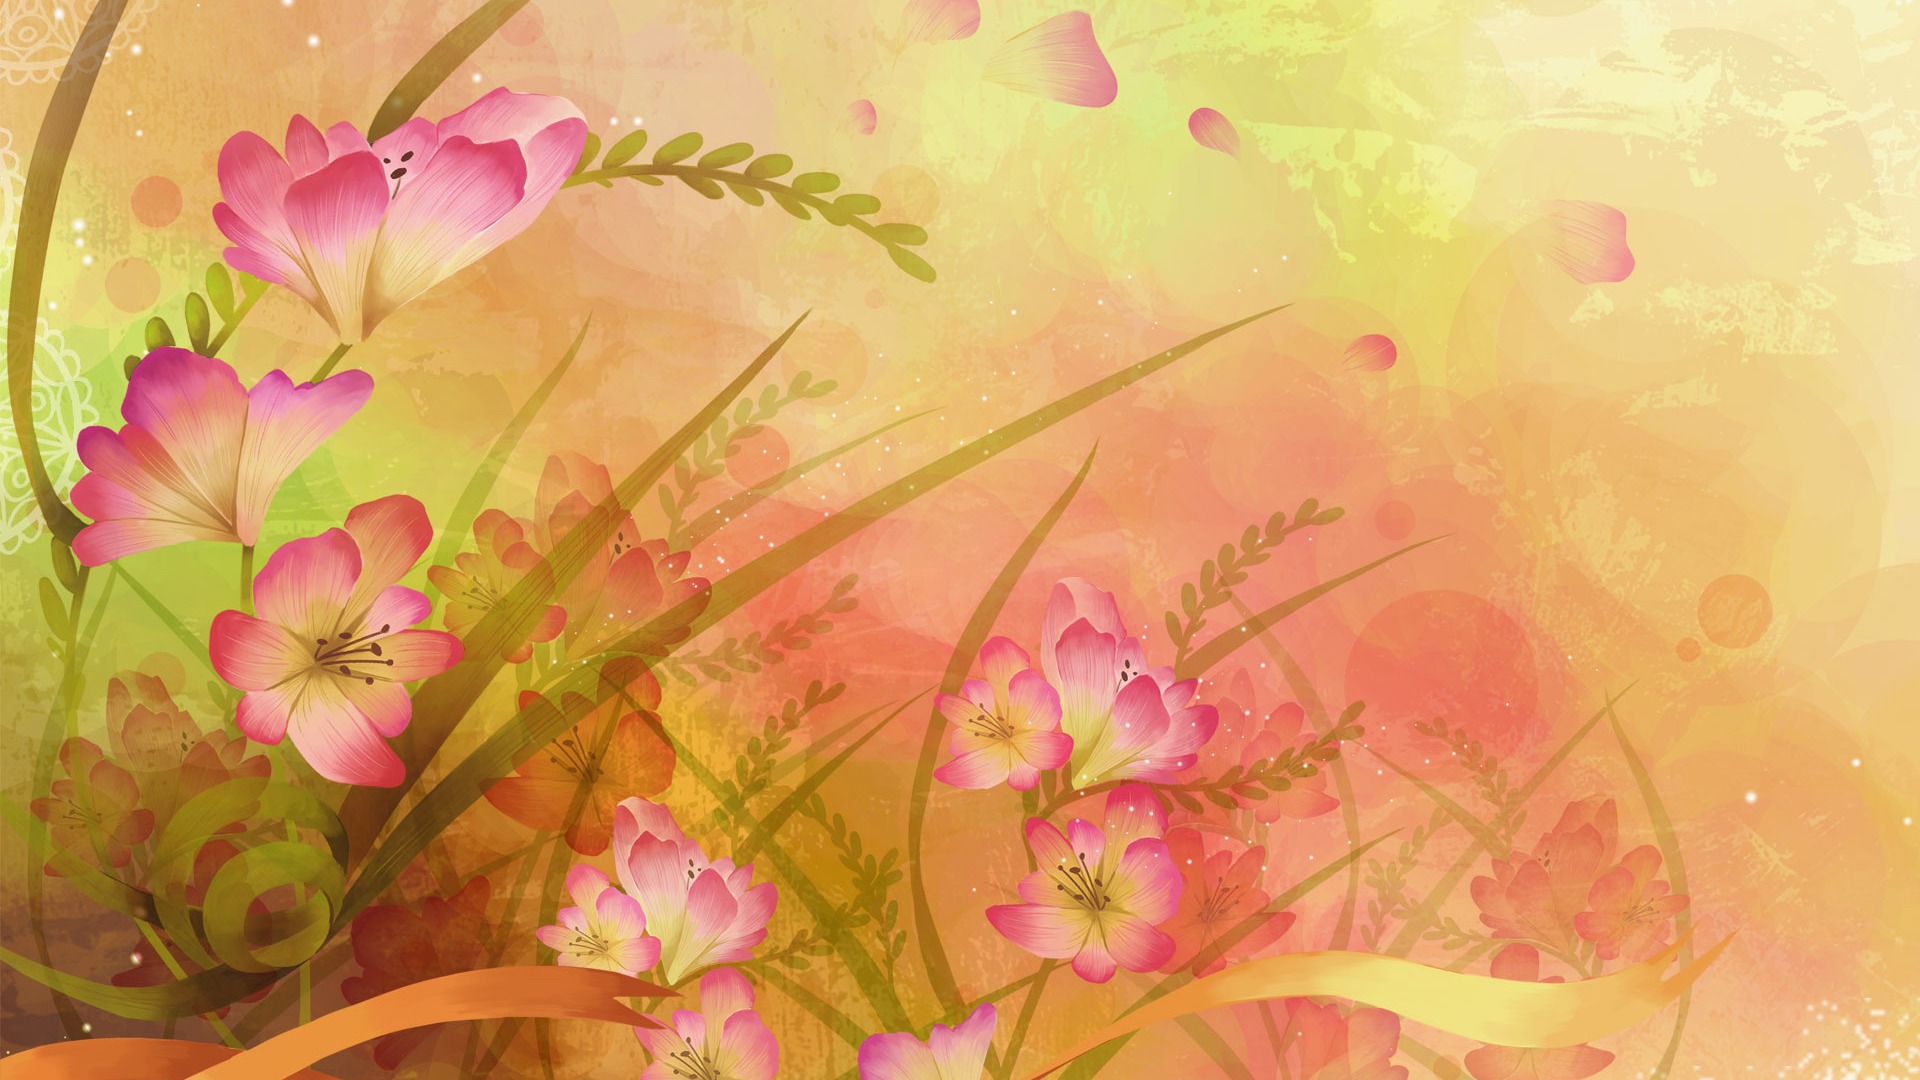 Synthetic Wallpaper Colorful Flower #40 - 1920x1080